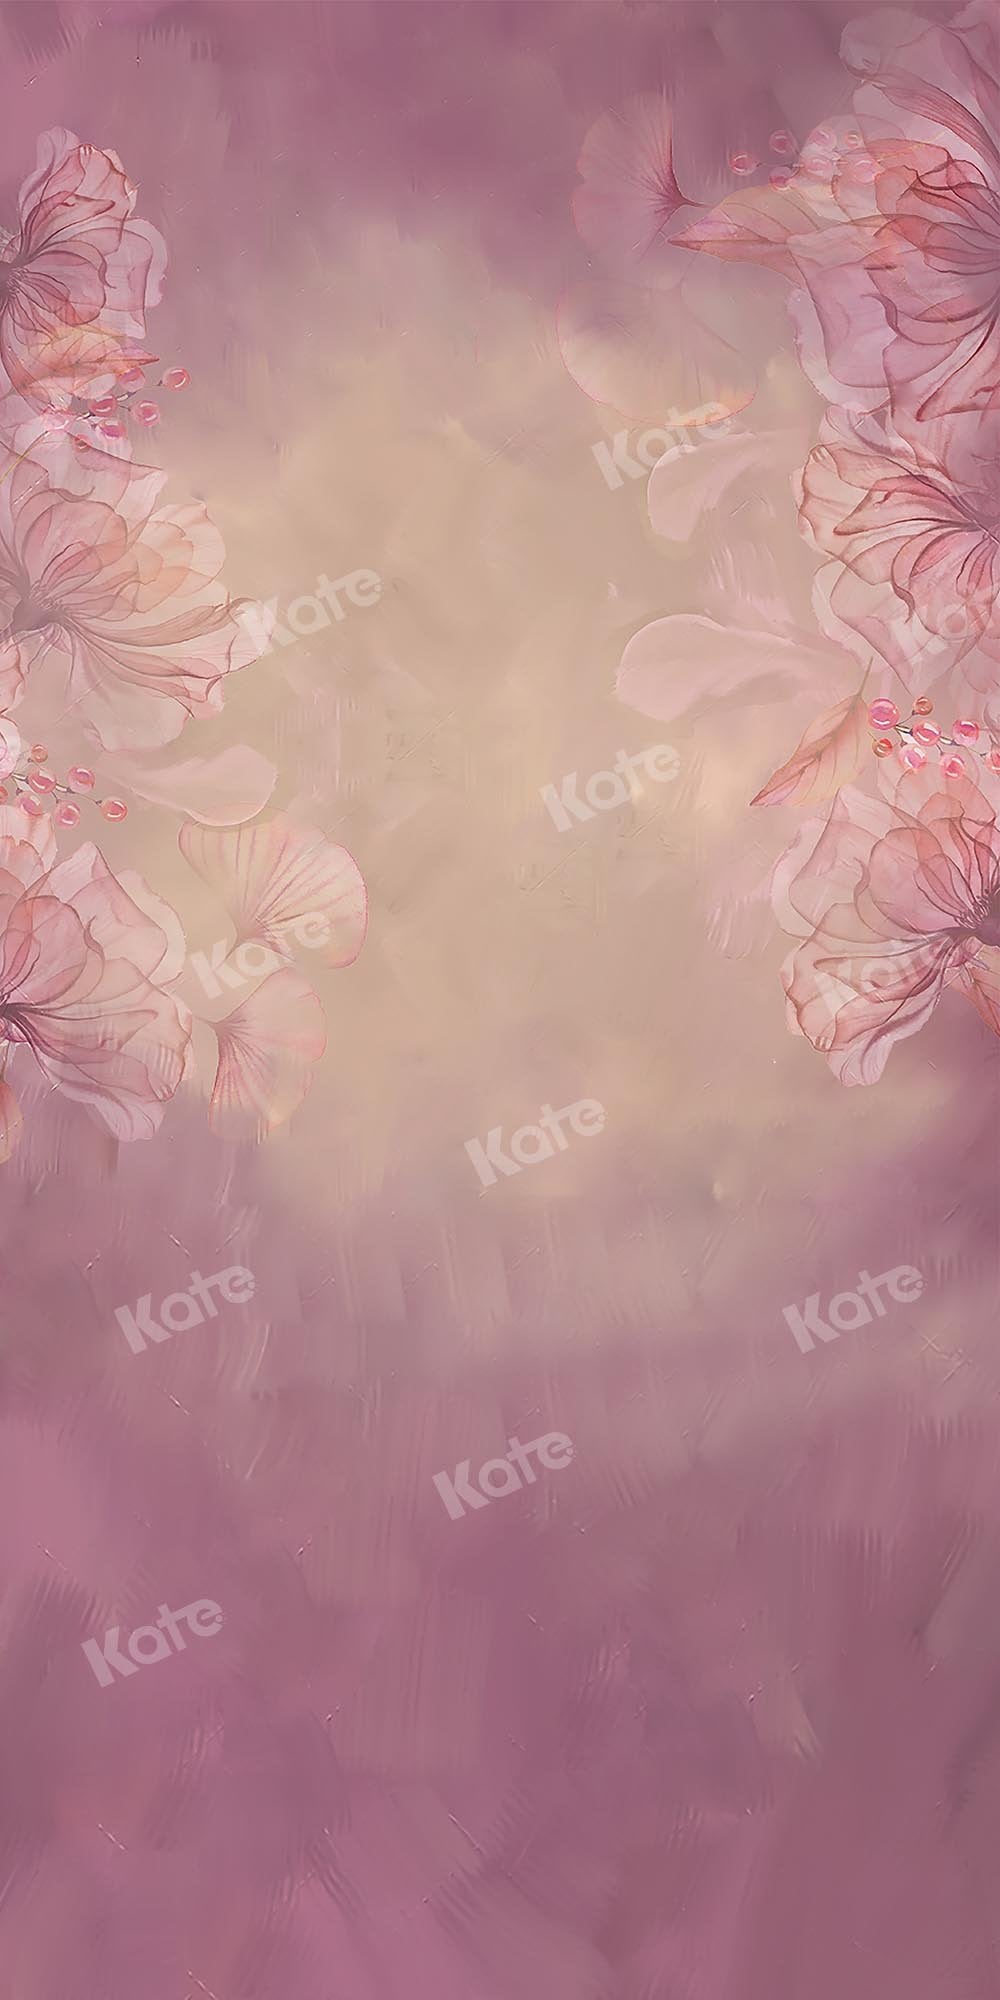 Kate Sweep Fine Art Flower Blurry Pink Backdrop Designed by GQ